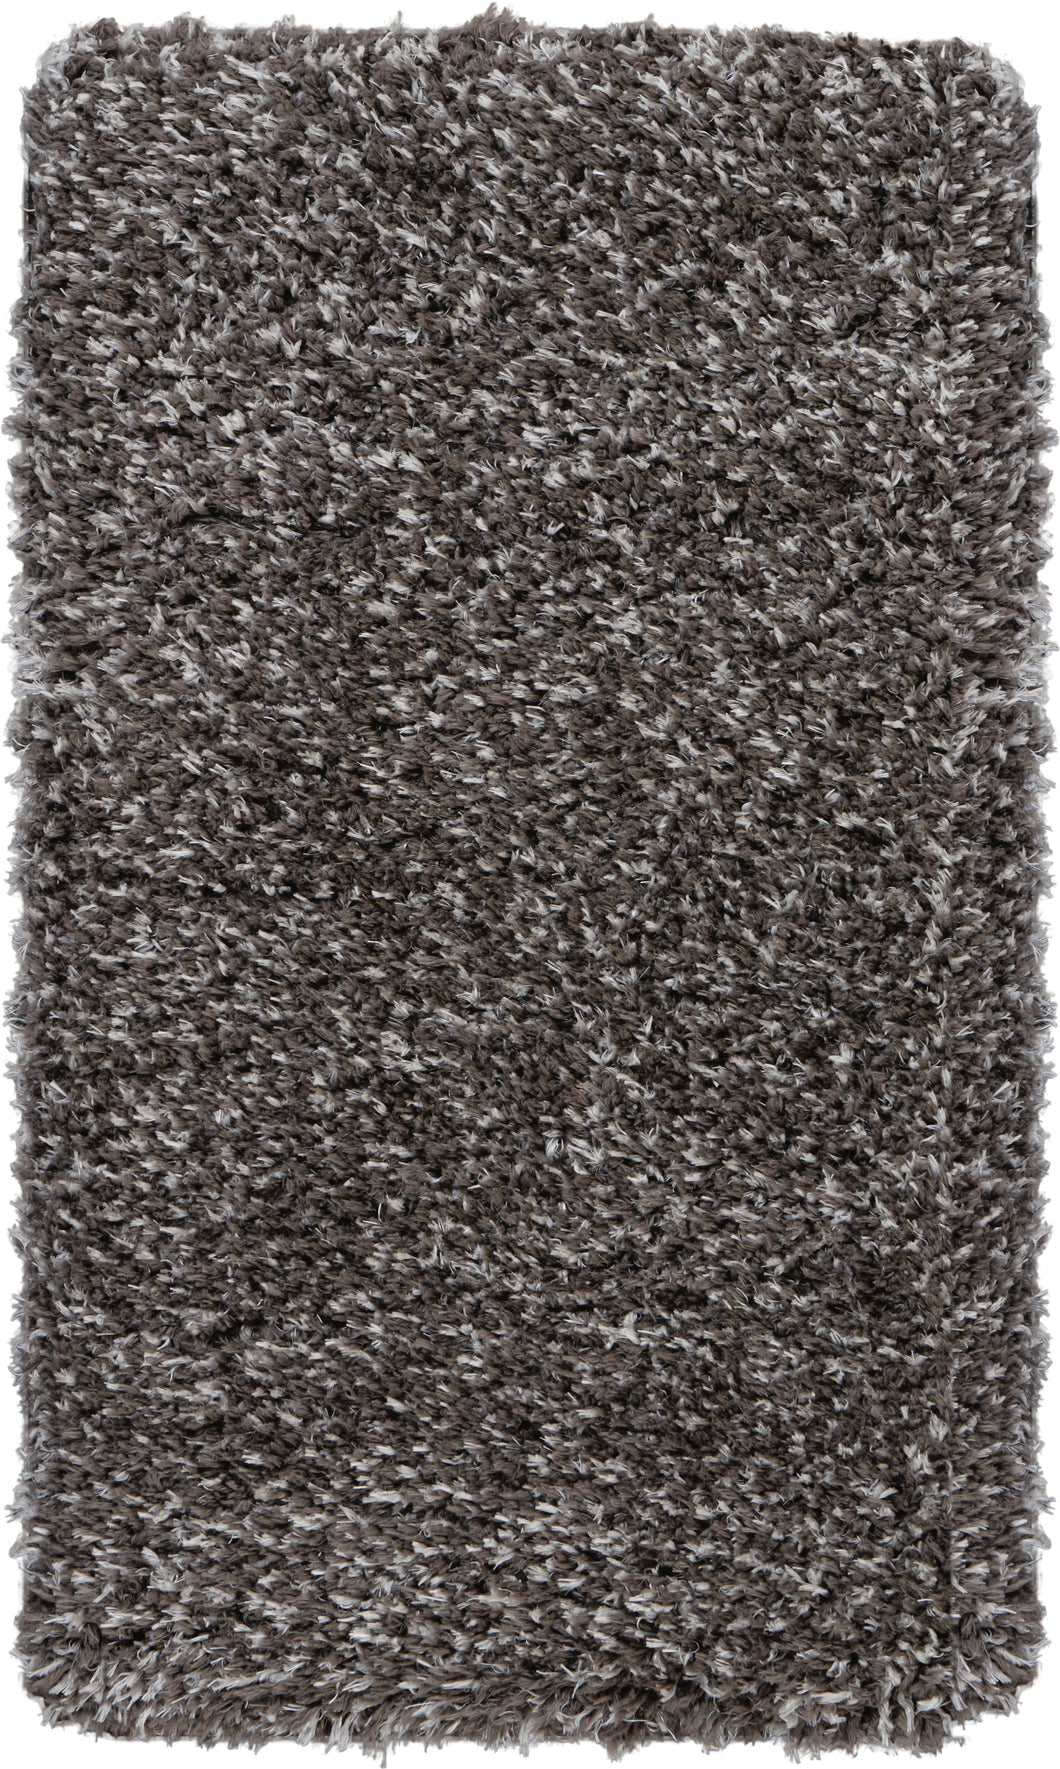 Nourison Luxe Shag 2' X 4' Charcoal Grey Plush Area Rug LXS01 Charcoal